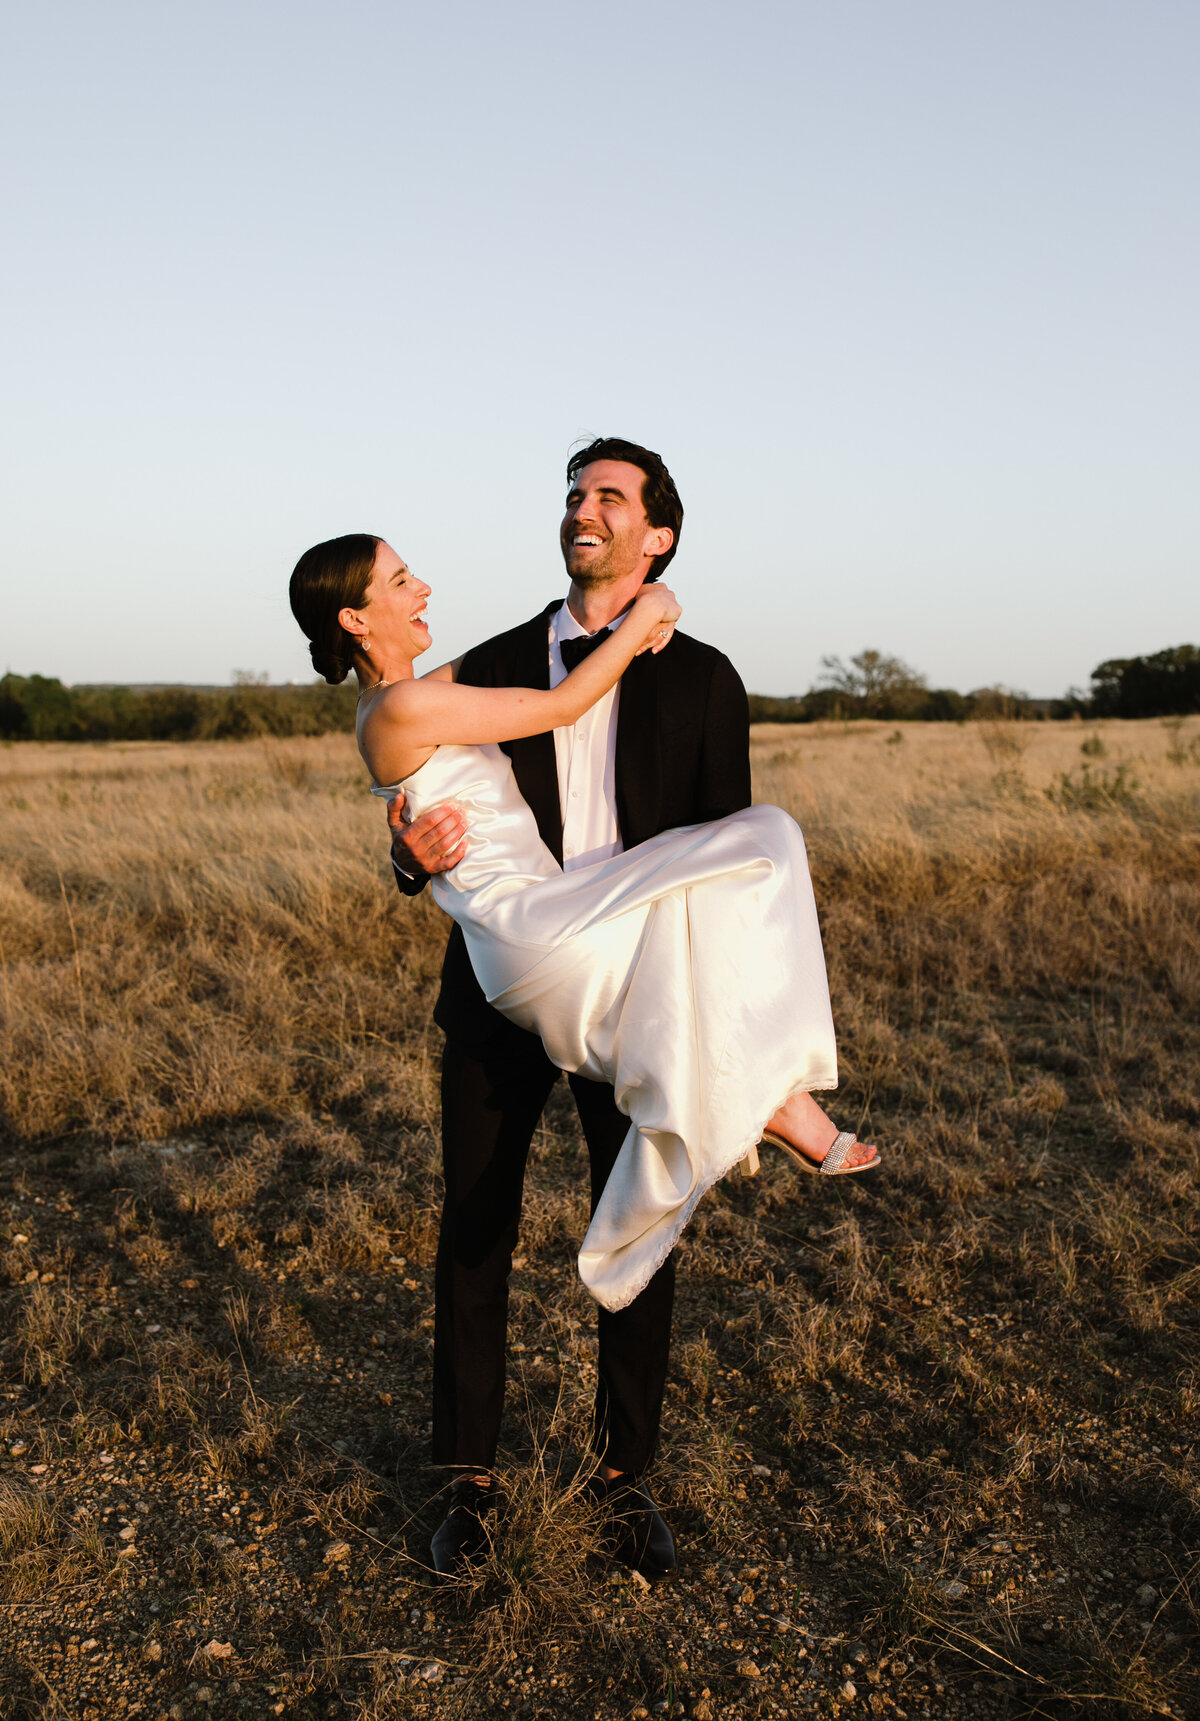 Groom carrying bride in his arms through a field